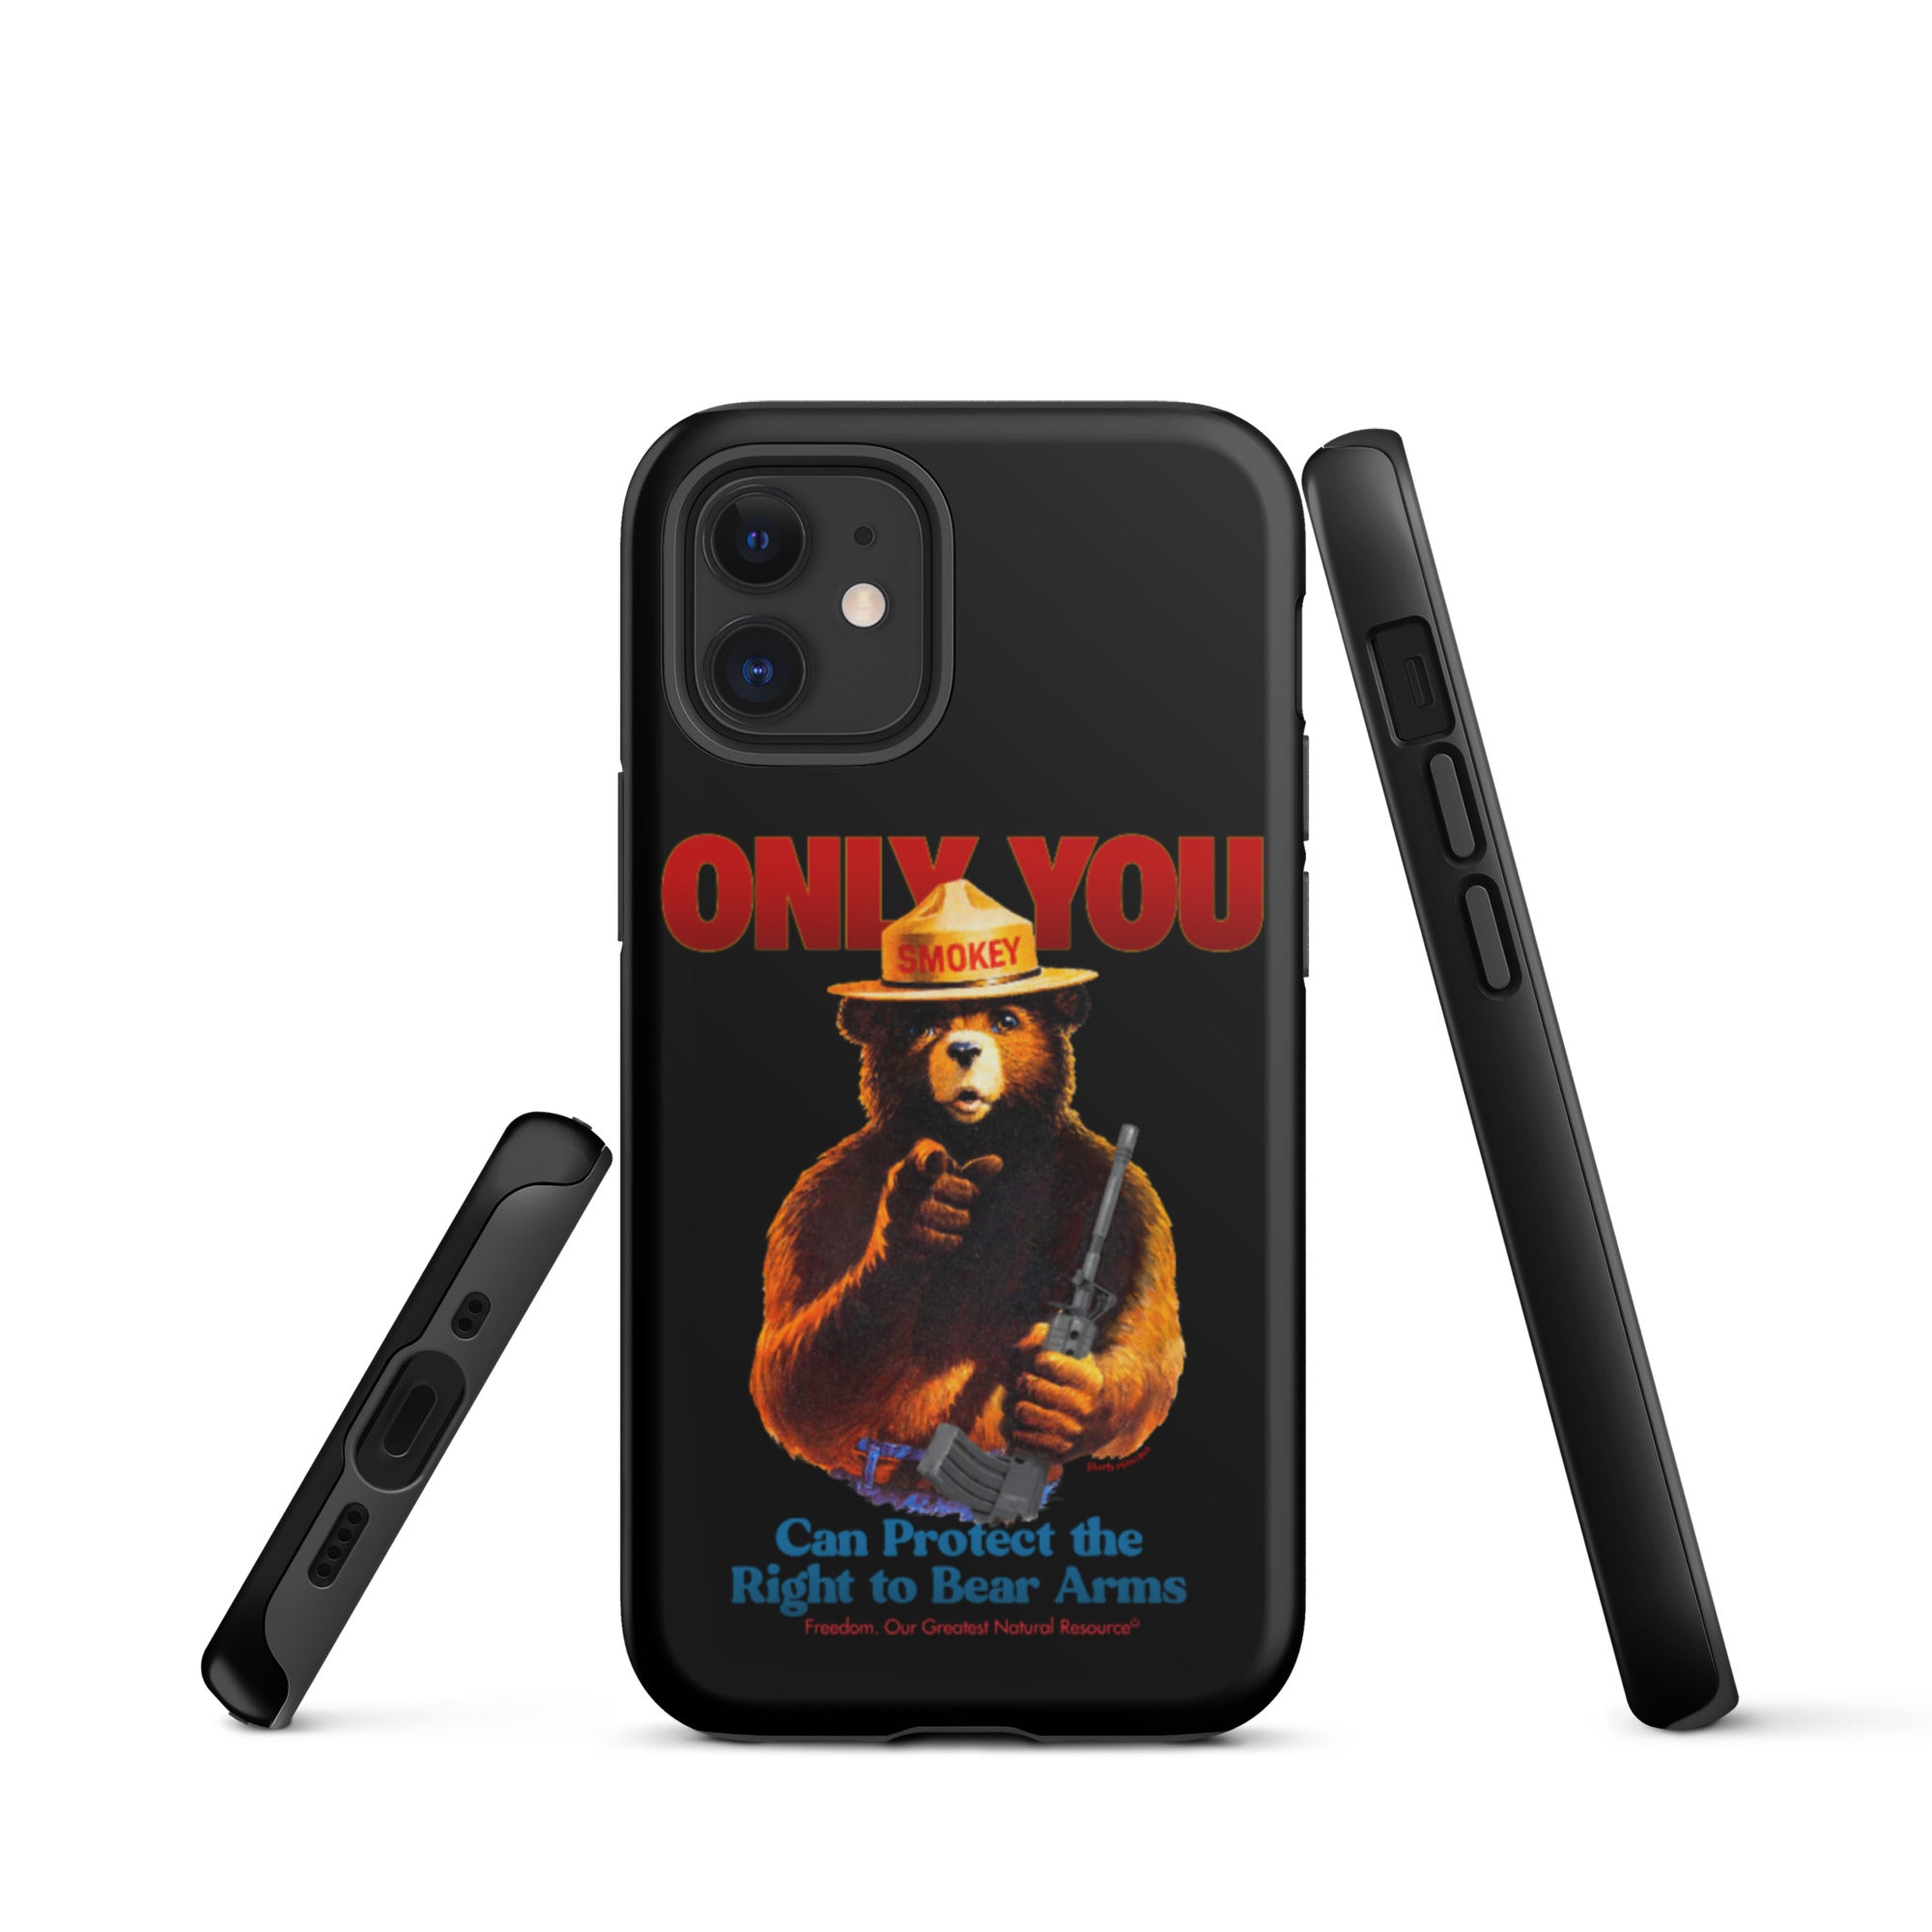 Only You Can Protect the Right to Bear Arms Tough iPhone case